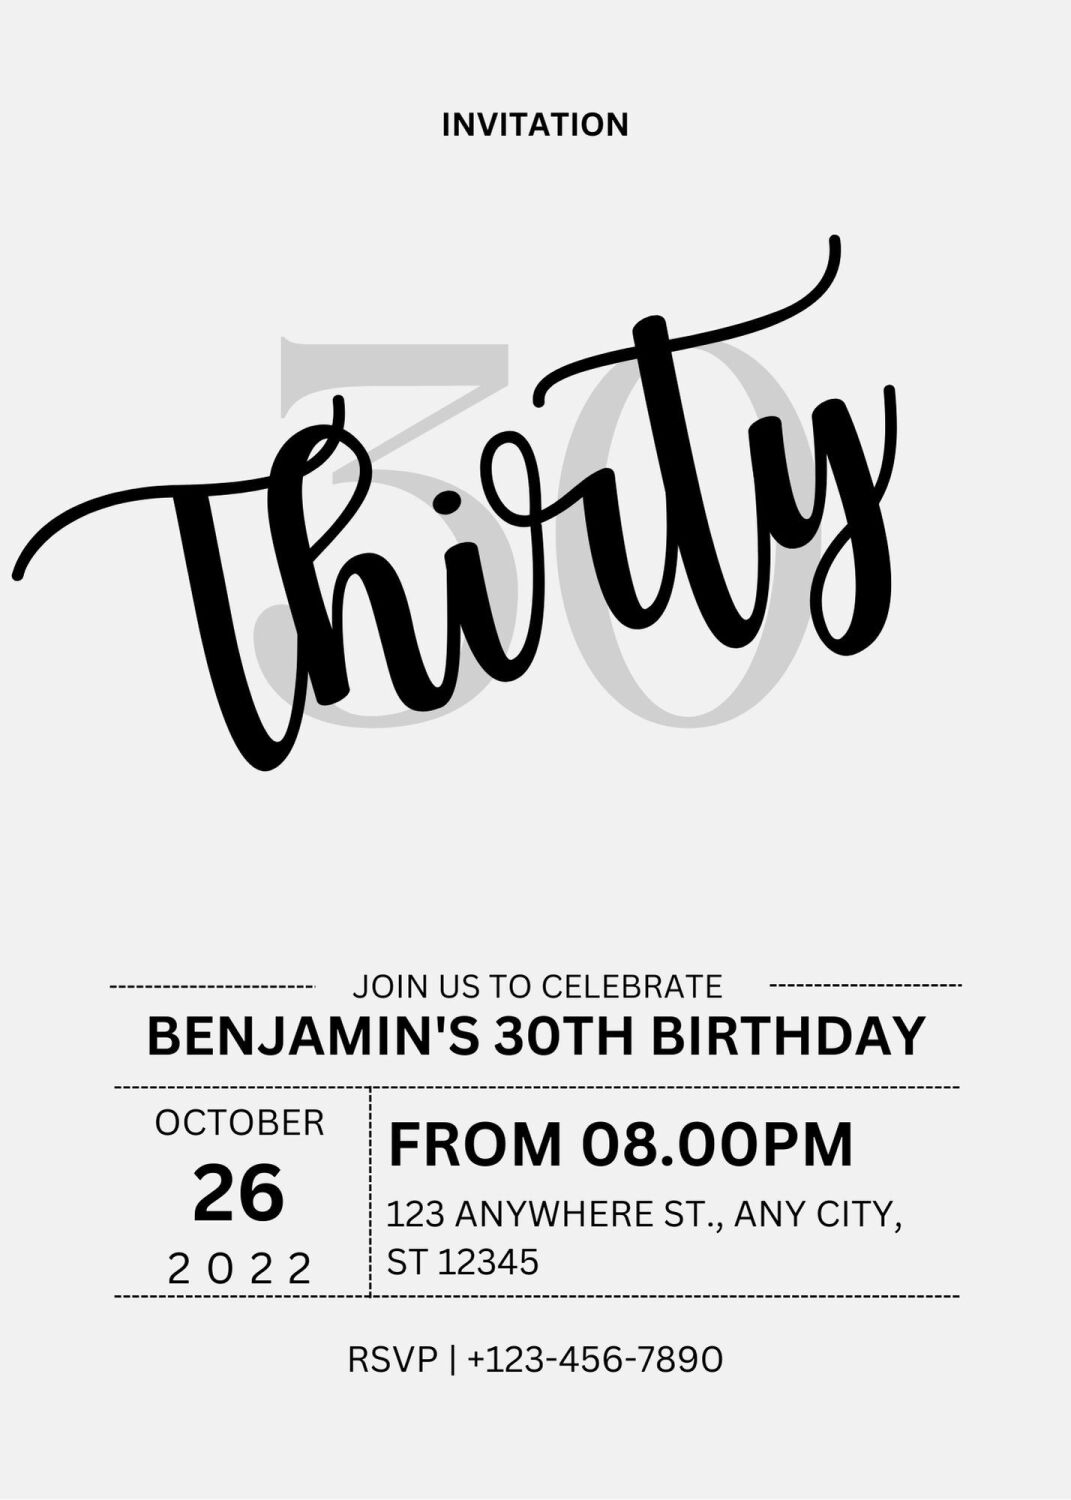 Personalised With Your Details - Customised Birthday Party Invitation PDF P